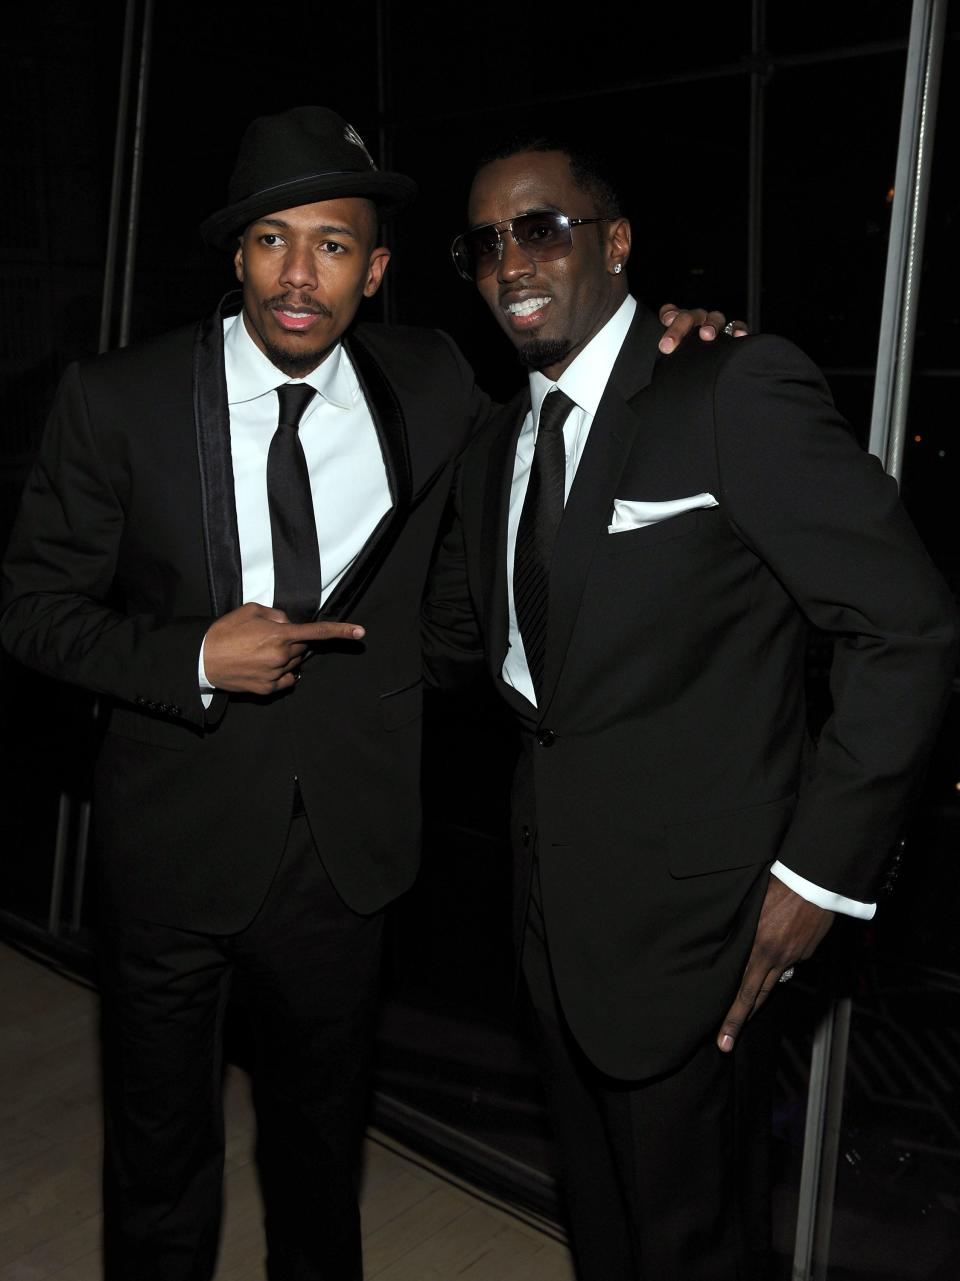 Nick Cannon (L) and Sean "Diddy" Combs attend City Of Hope's Music and Entertainment Industry Presents The Roast Of Stephen Hill at Jazz at Lincoln Center on Dec. 9, 2010 in New York City.